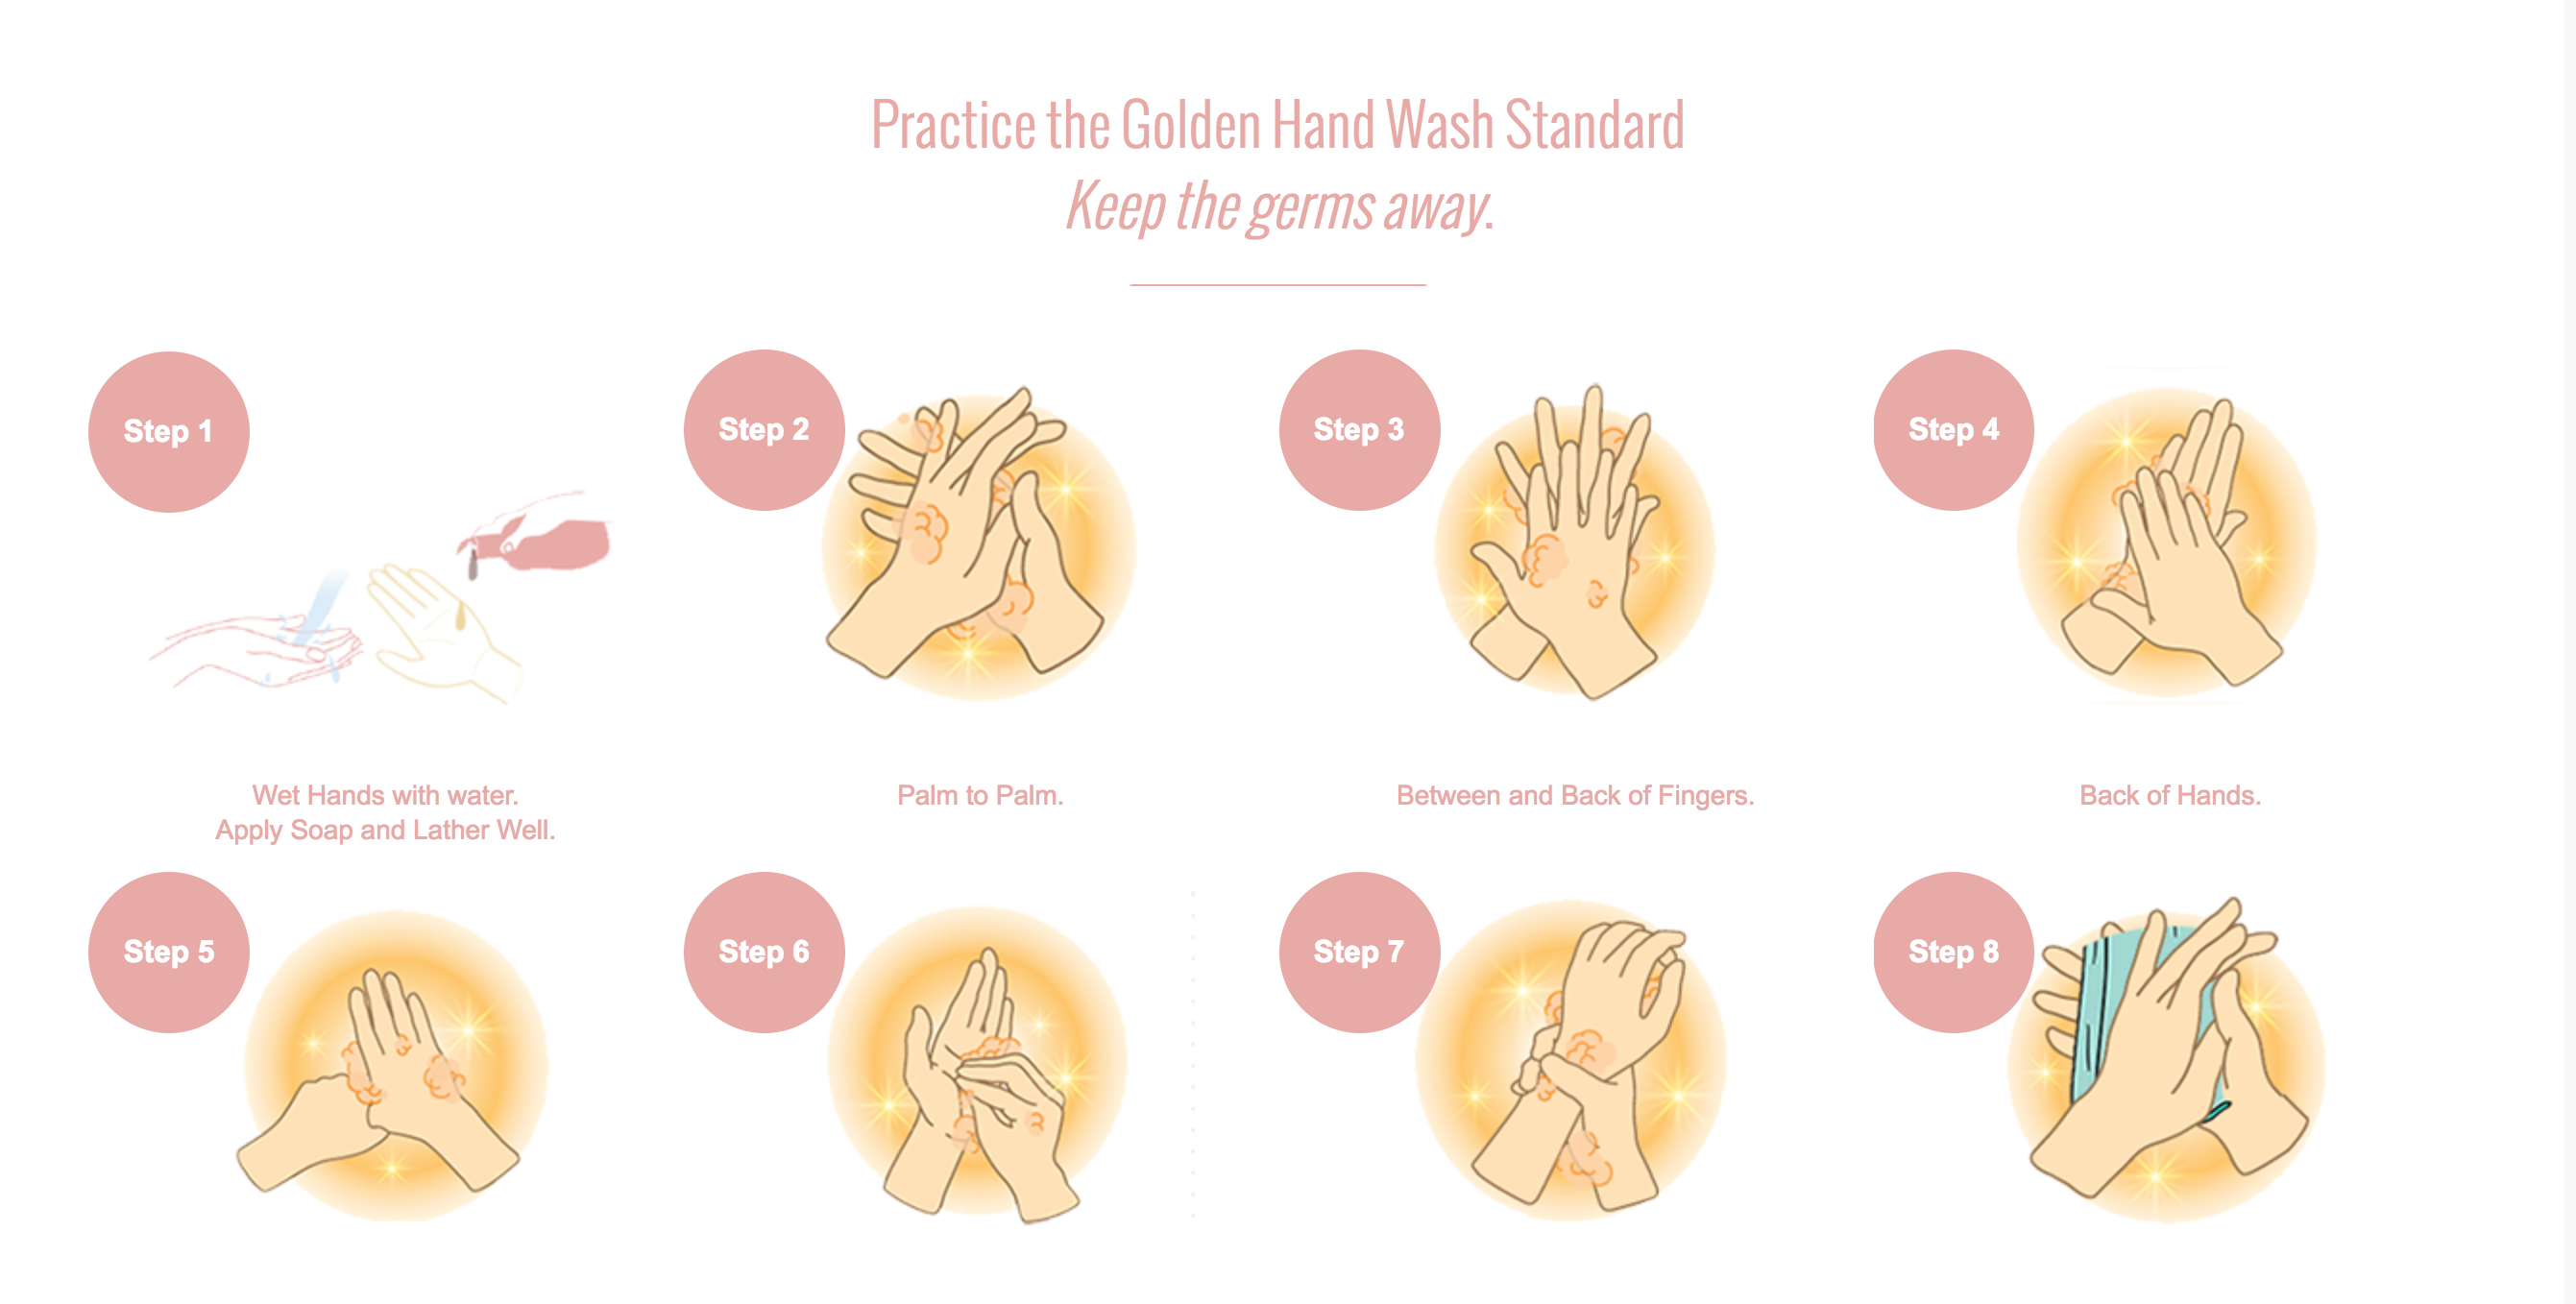 Practice the Golden Hand Wash Standard. Keep the germs away.